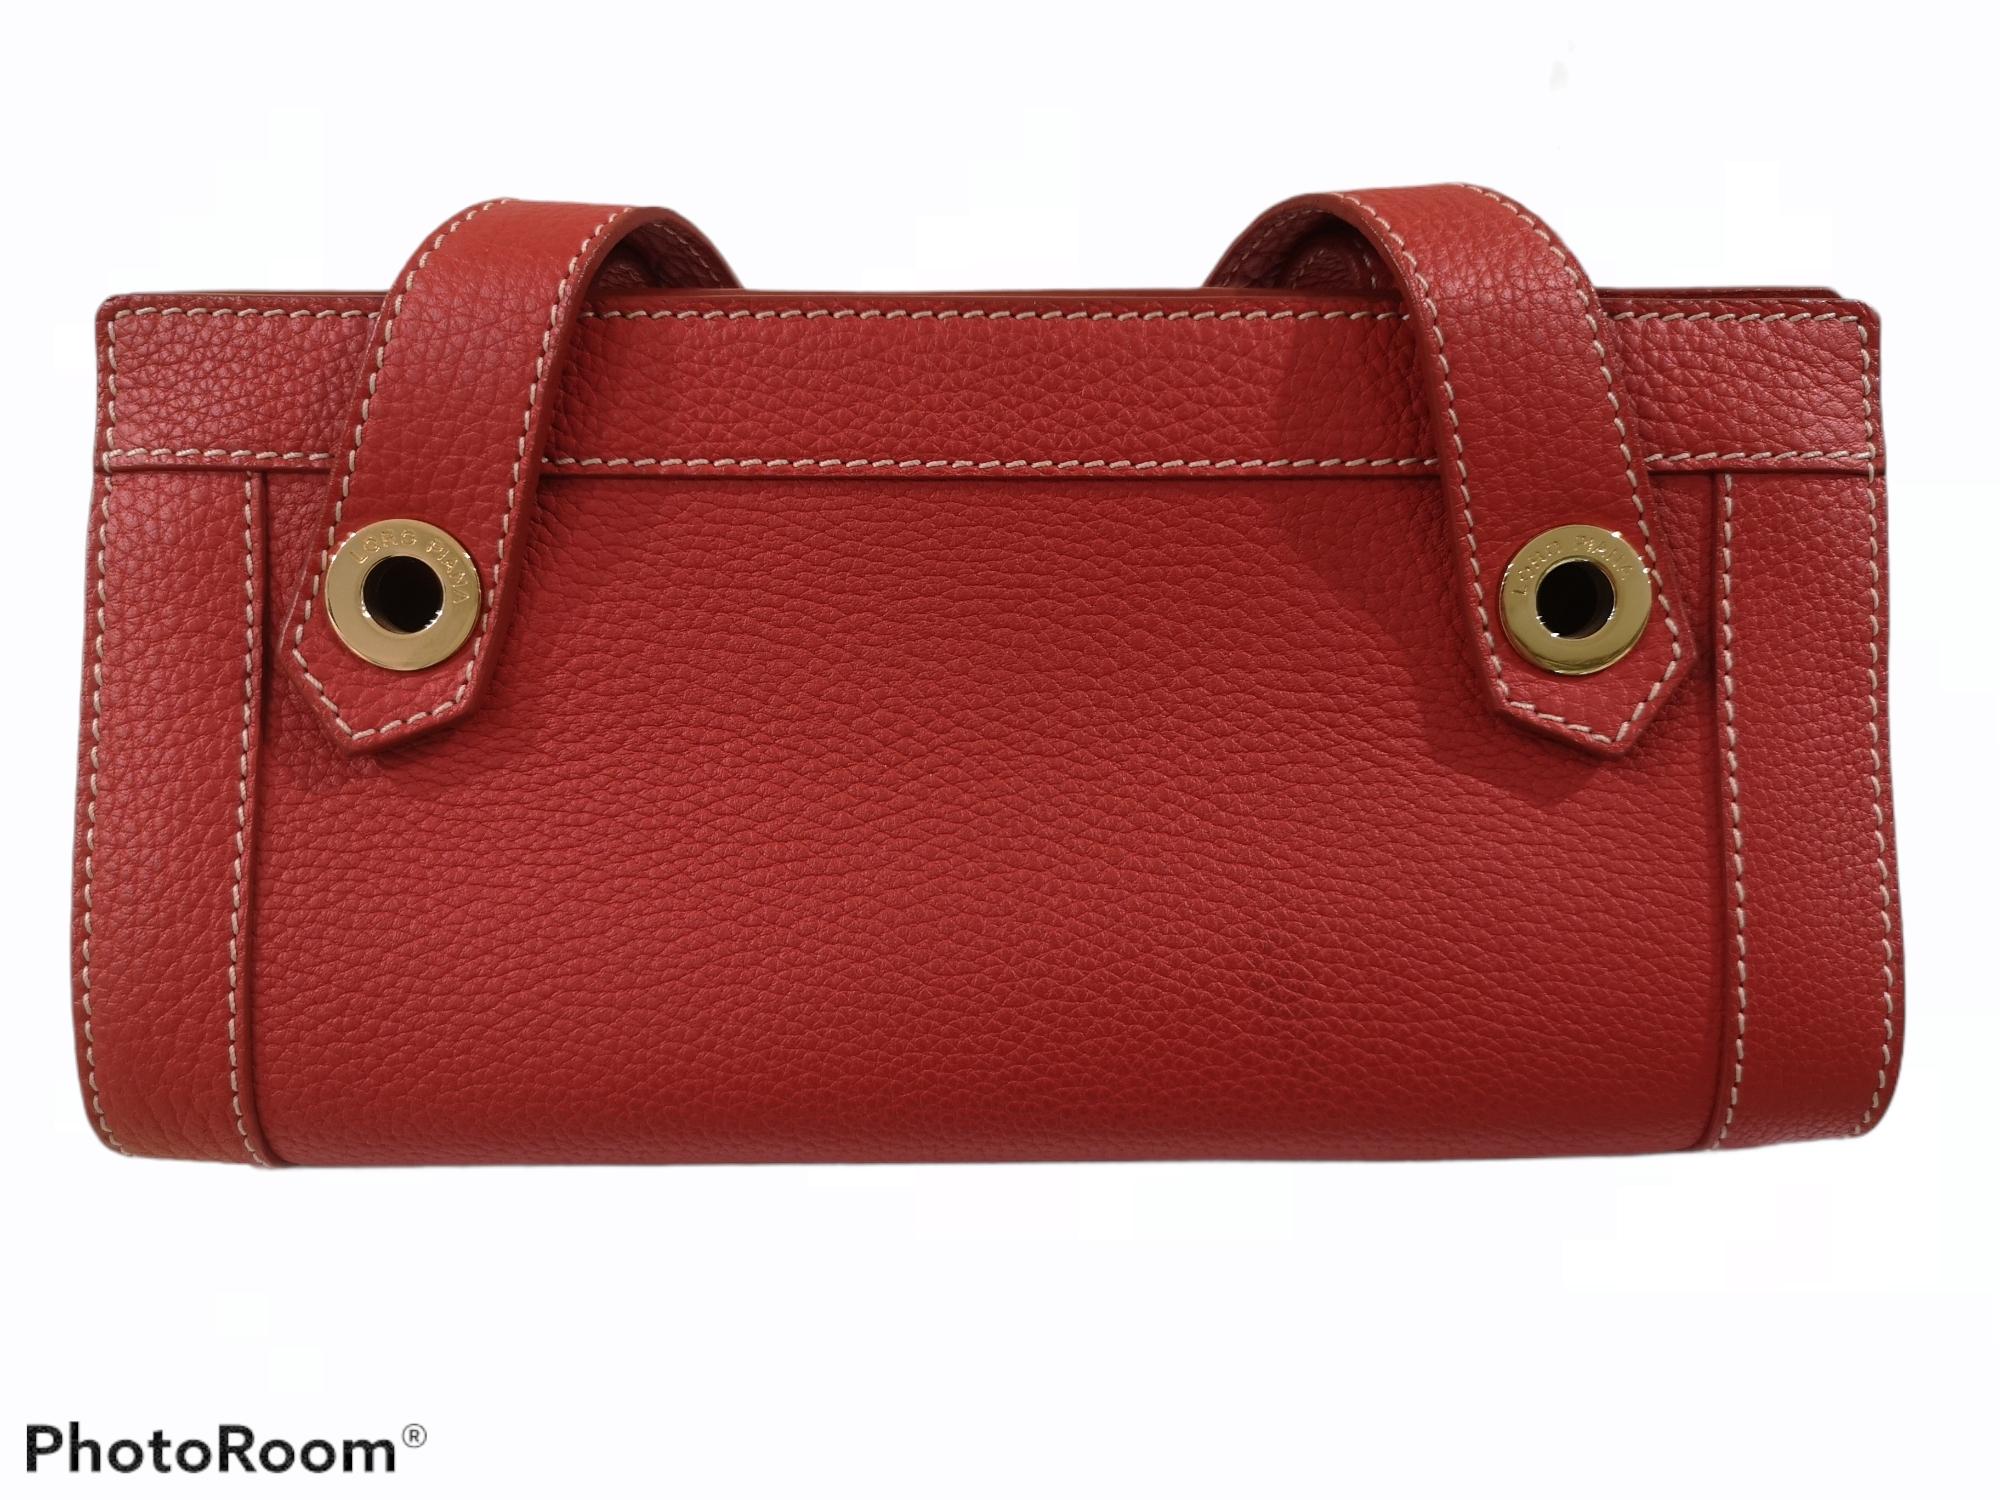 Loro Piana Red shoulder bag / handle bag
gold tone hardware
totally made in italy
measurements: 31 x 14 cm, 11 depth